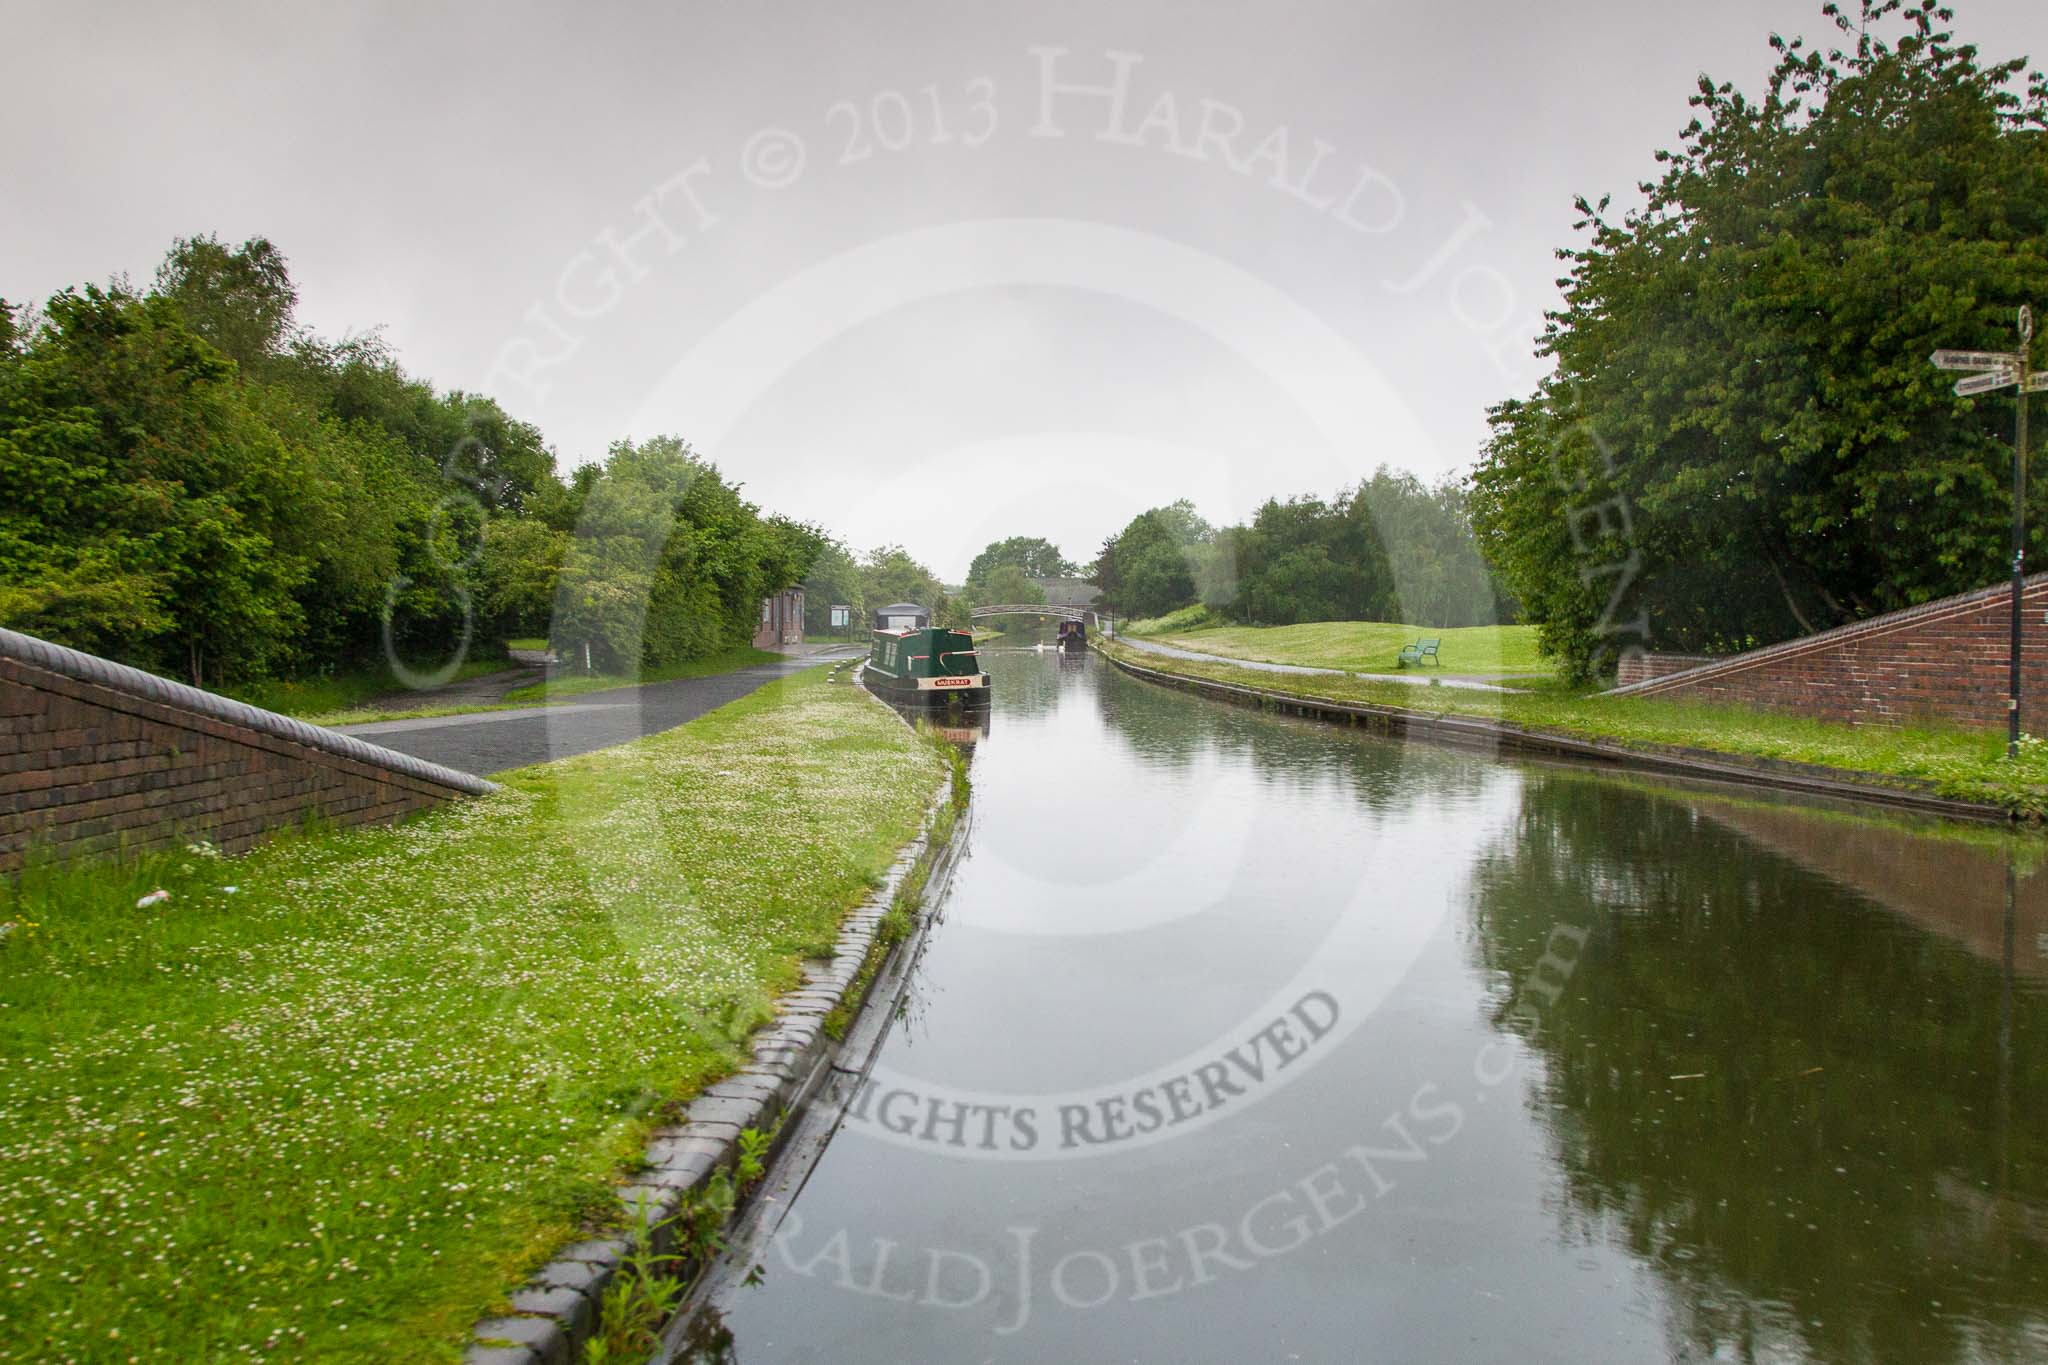 BCN Marathon Challenge 2014: On the Dudley No 1 Canal at Windmill End Junction..
Birmingham Canal Navigation,


United Kingdom,
on 25 May 2014 at 06:36, image #200